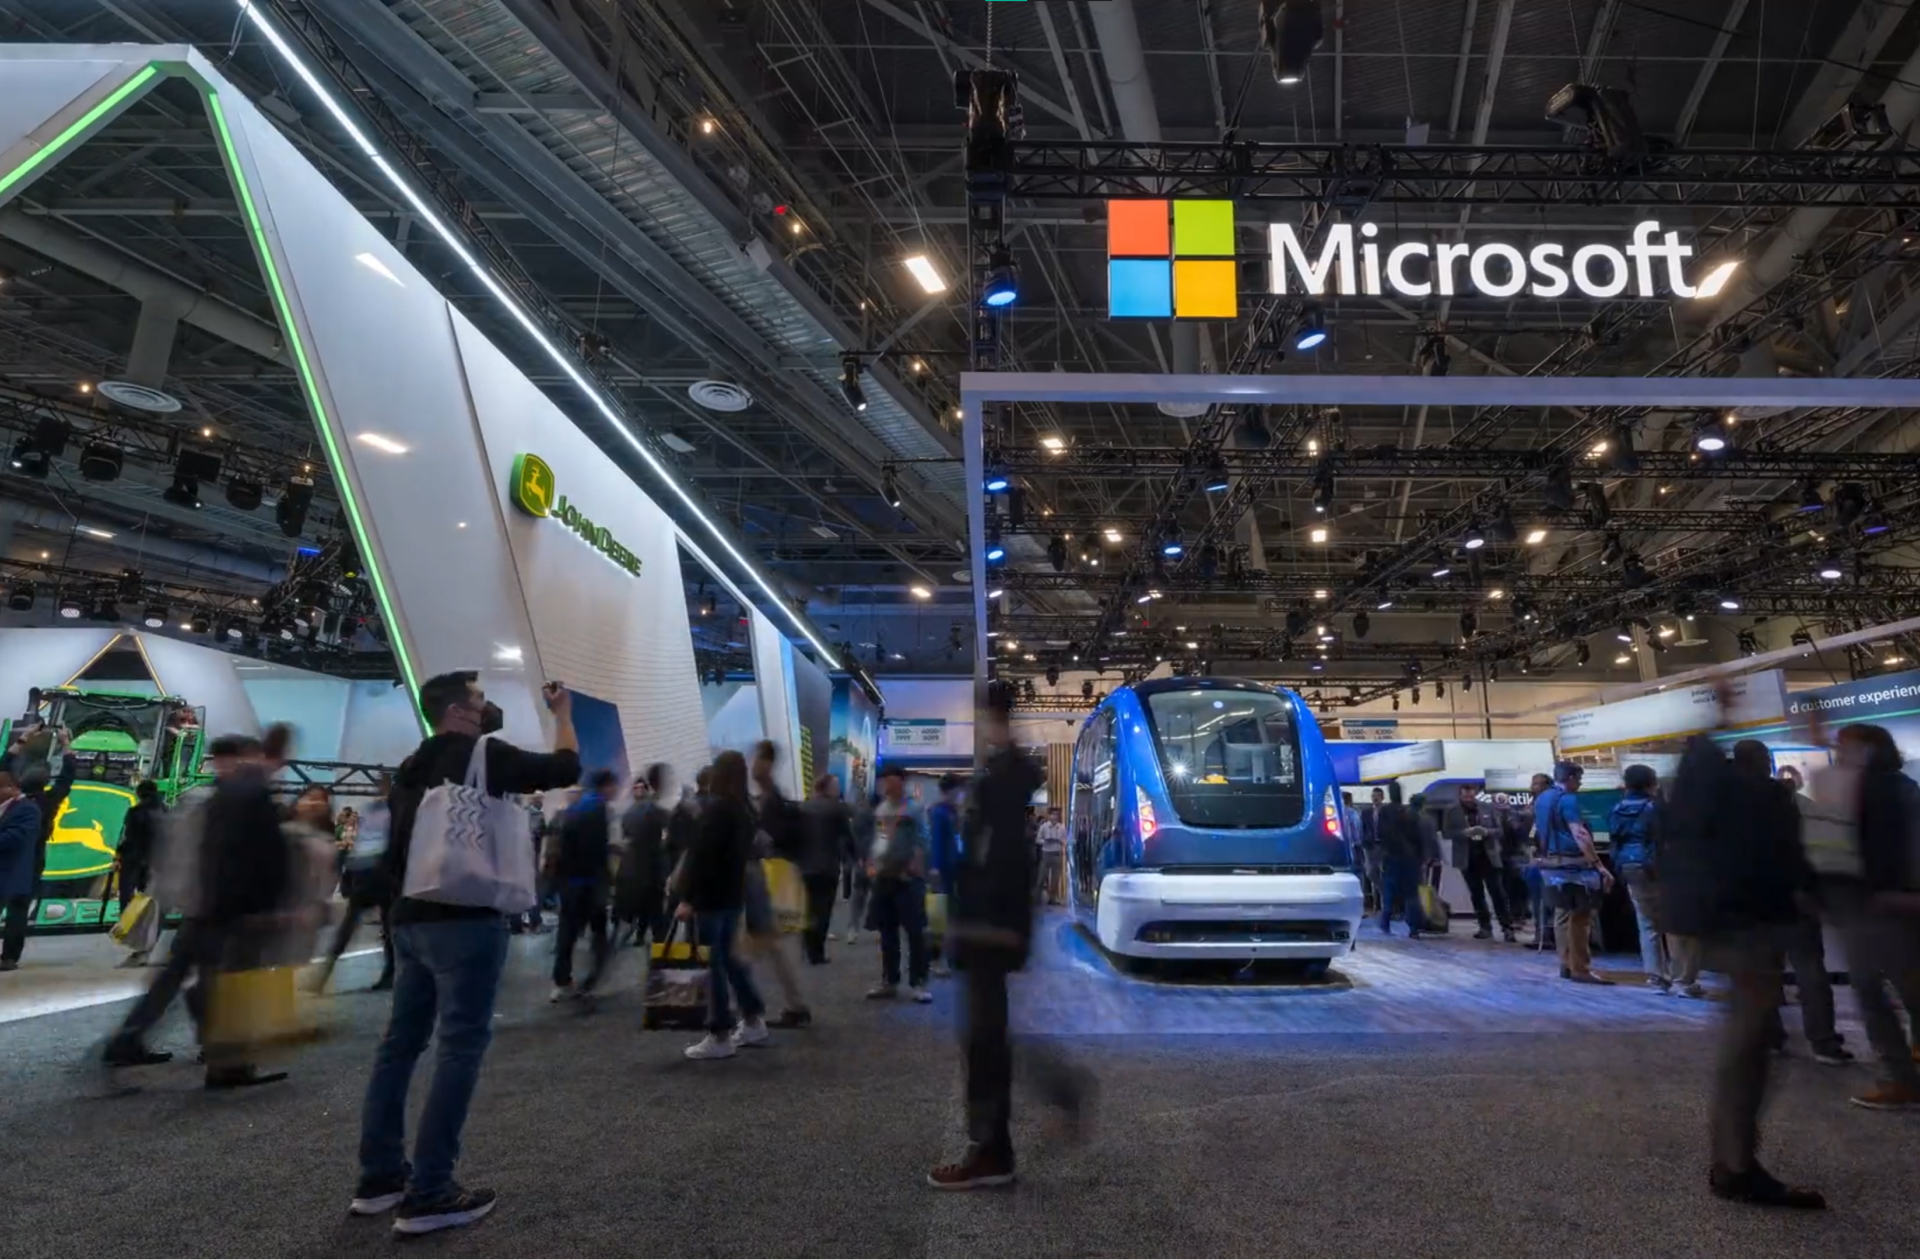 The John Deere® “Fully Autonomous Tractor” and Microsoft® “Drive the future of mobility” exhibits.